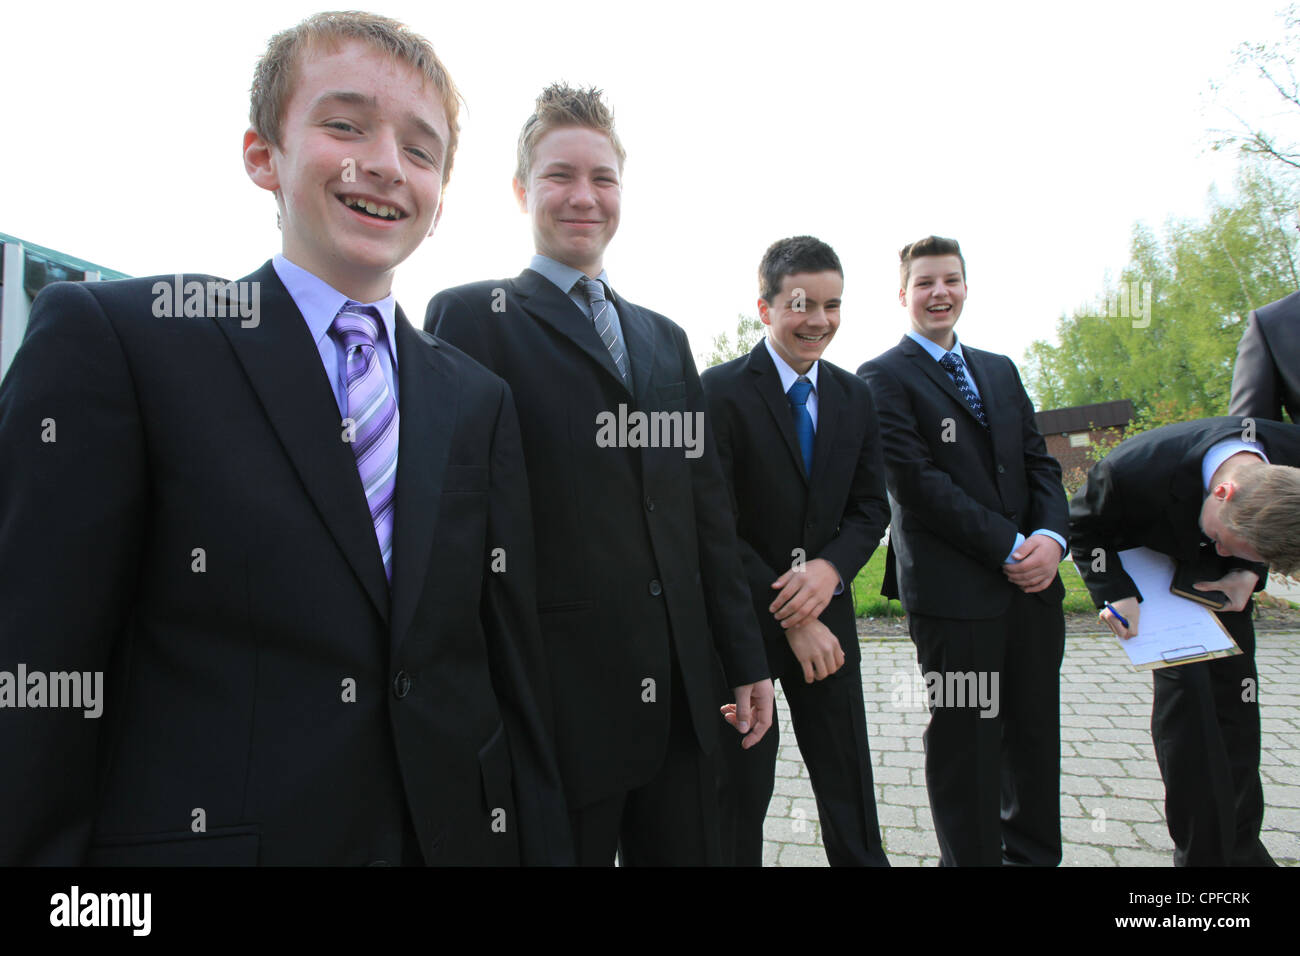 Boys with suits and ties pose for a group photo while waiting for the protestant confirmation ceremony, Germany Stock Photo